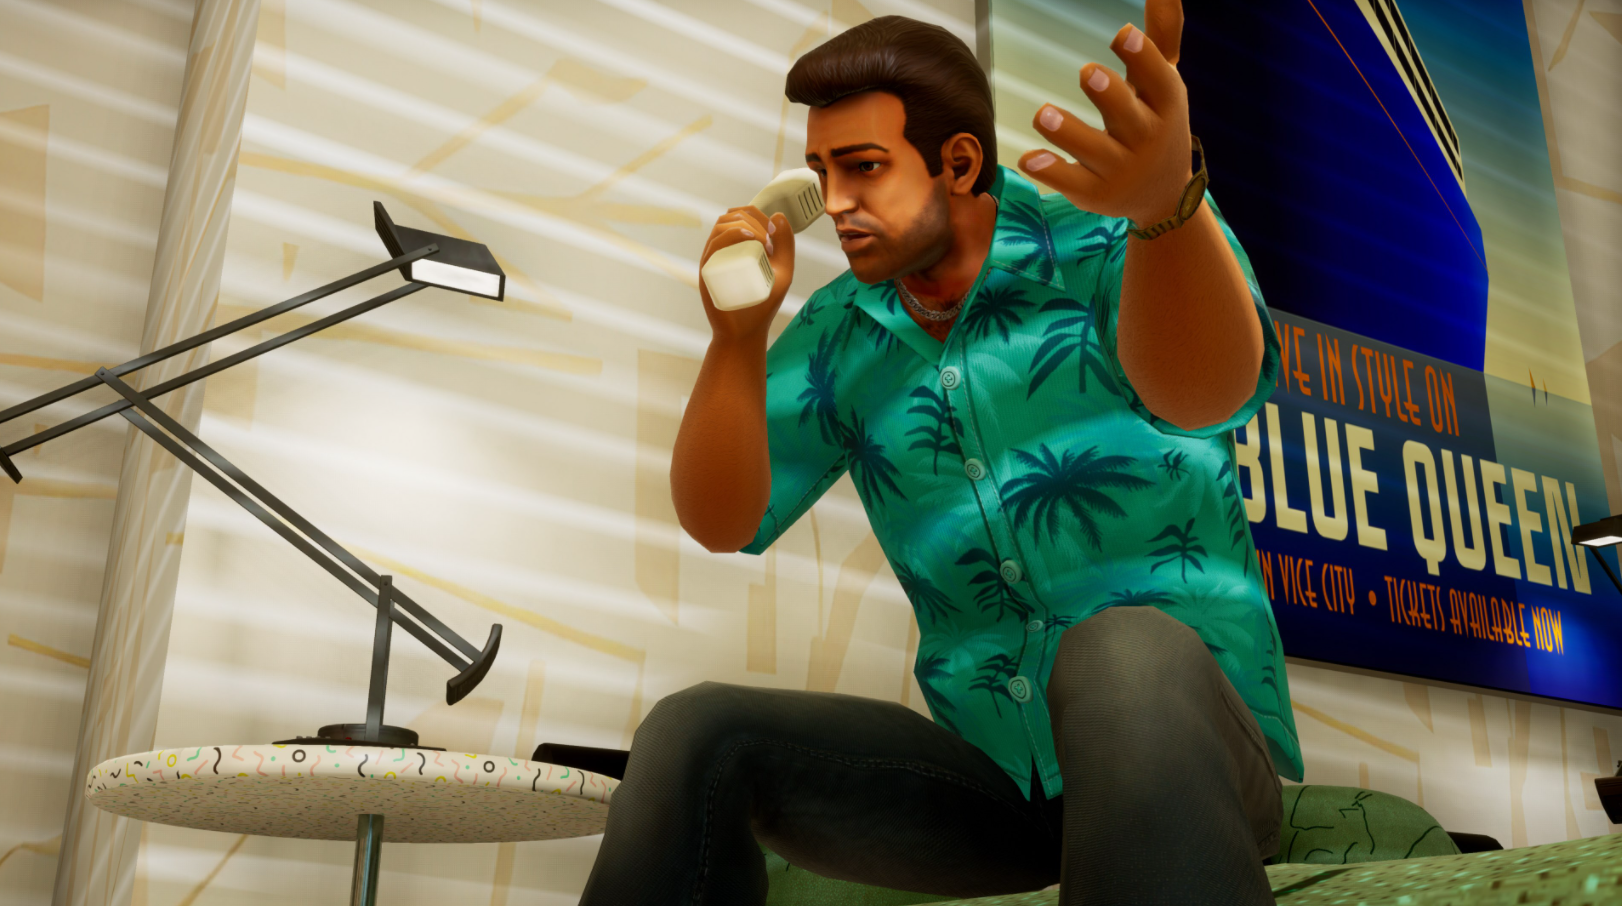 Grand Theft Auto: Vice City is best left as a hazy, enjoyable memory